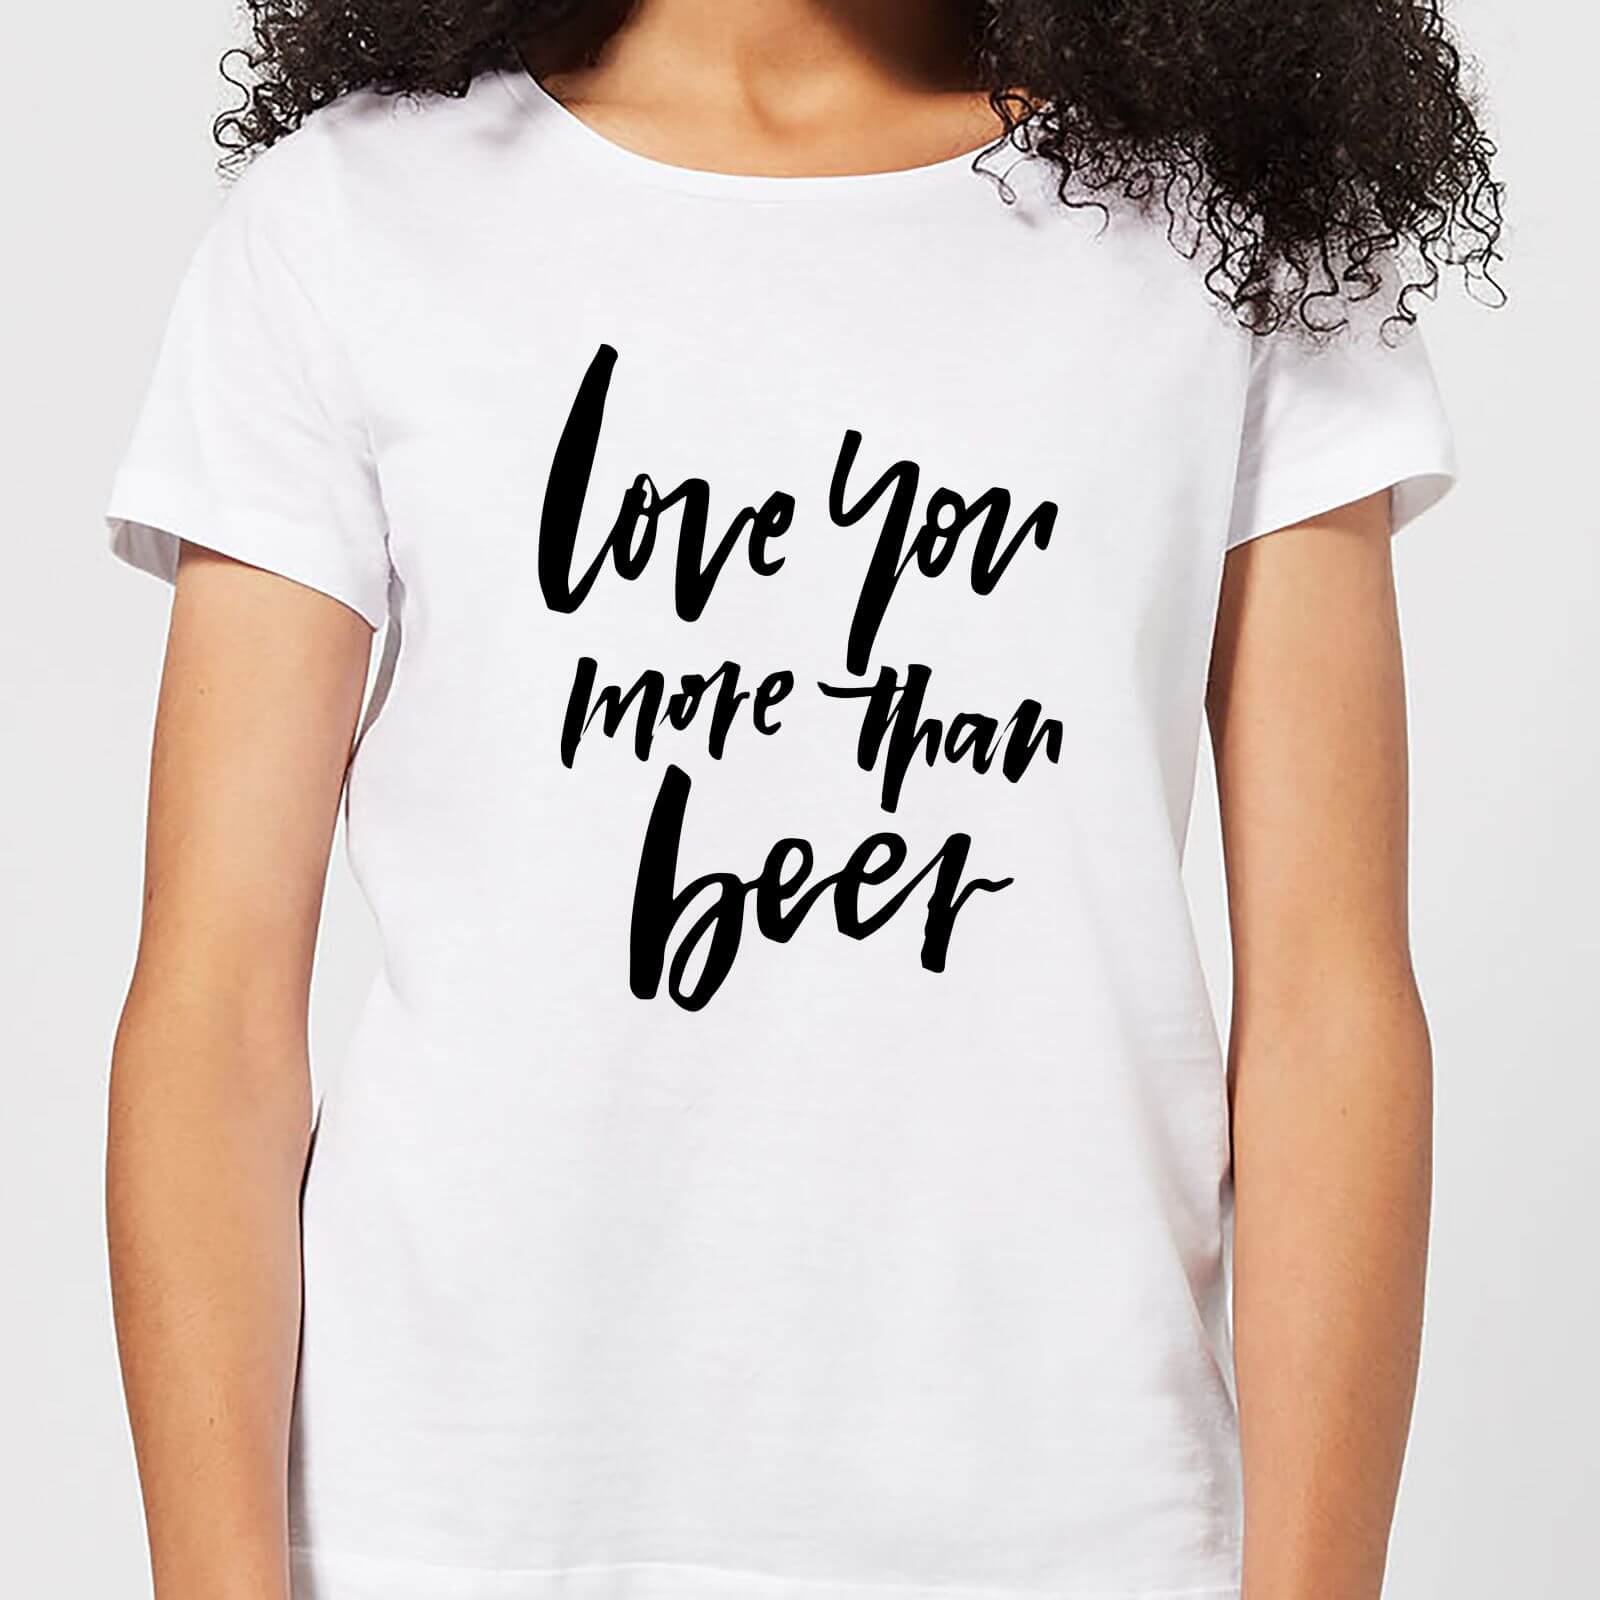 Love You More Than Beer Women's T-Shirt - White - S - White